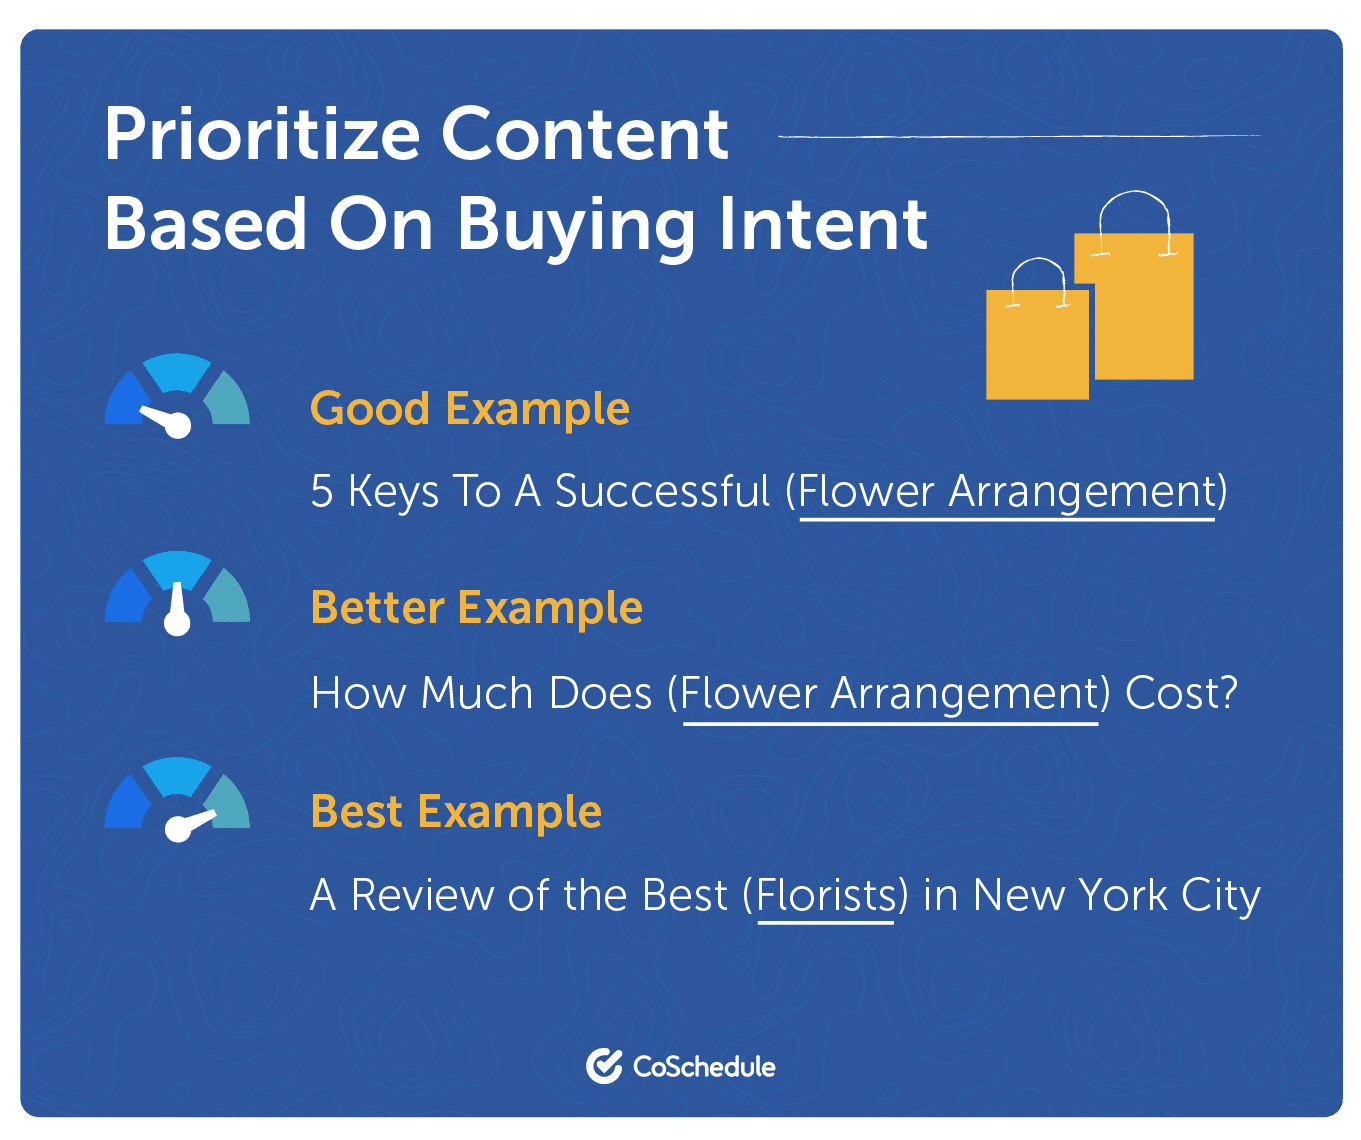 Prioritize based on buying intent